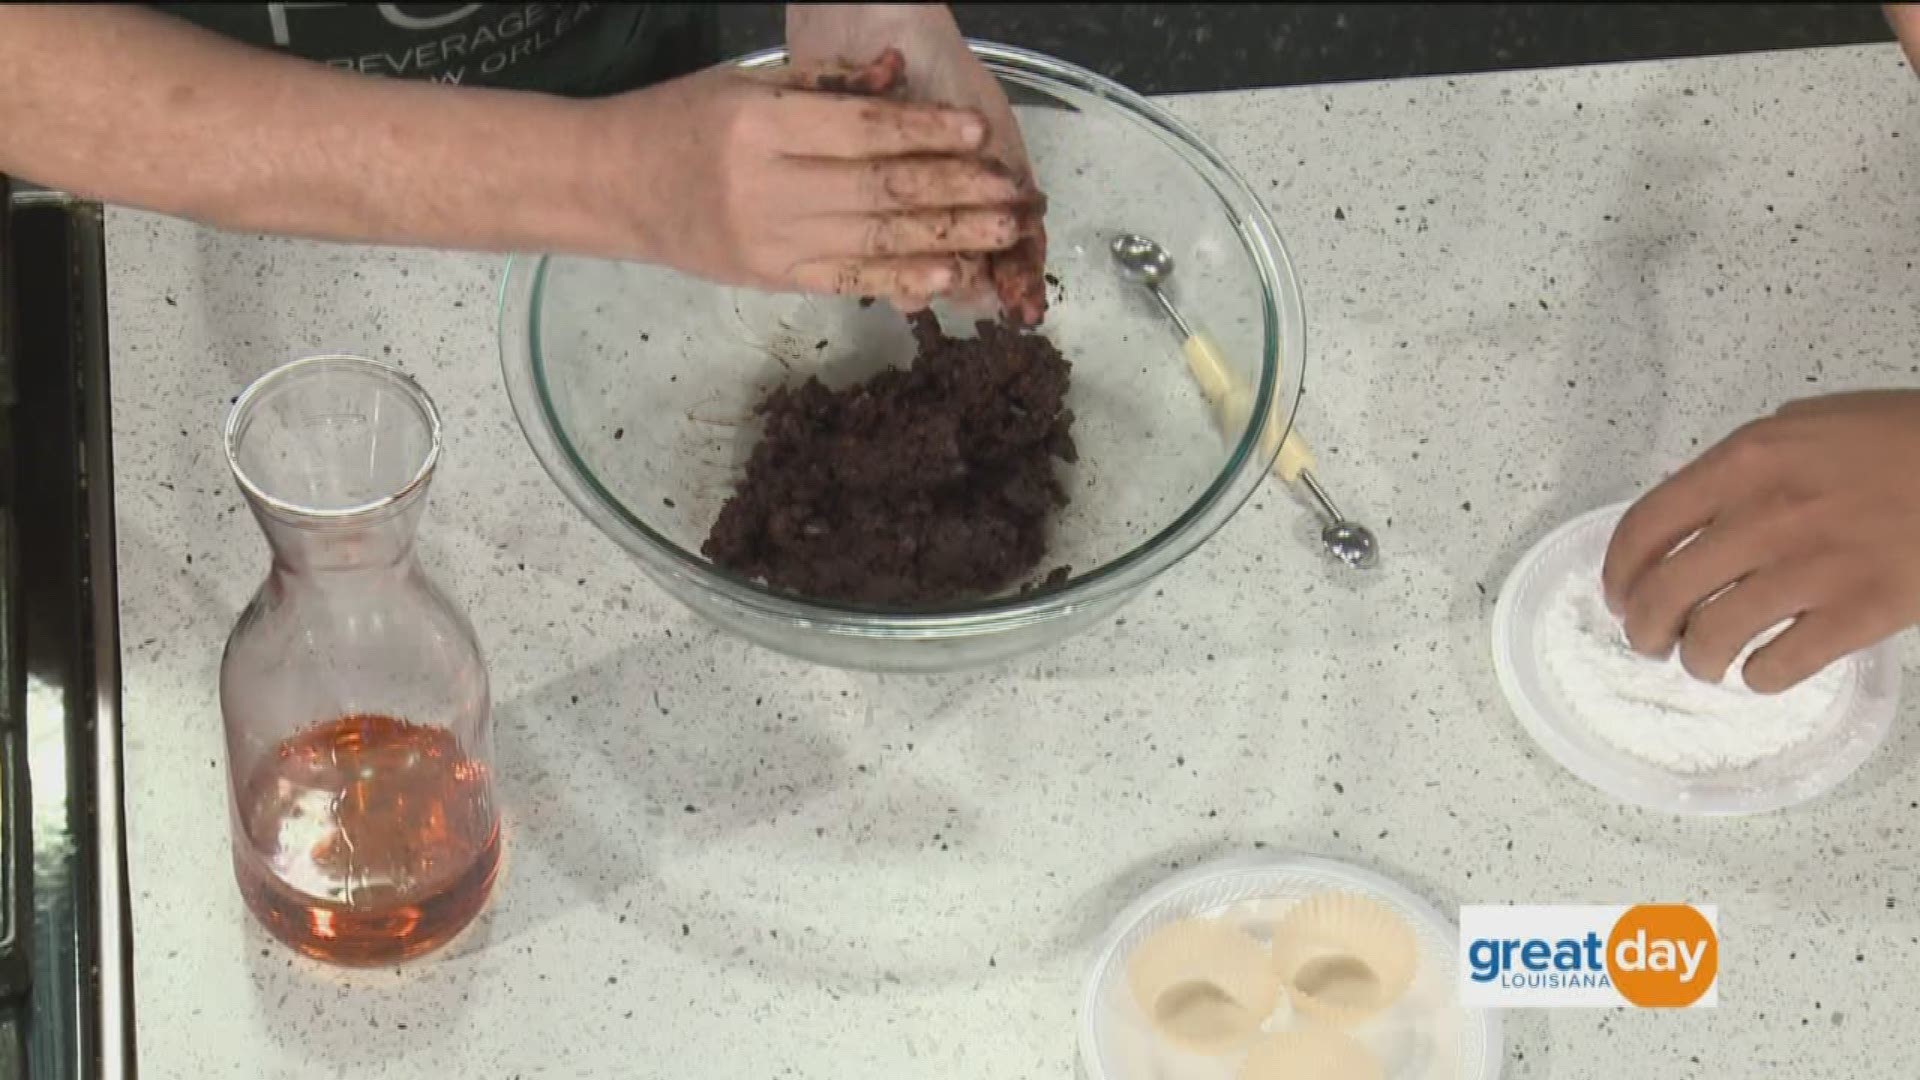 Liz Williams with the Southern Food & Beverage Museum stopped by to show us how to make bourbon balls.